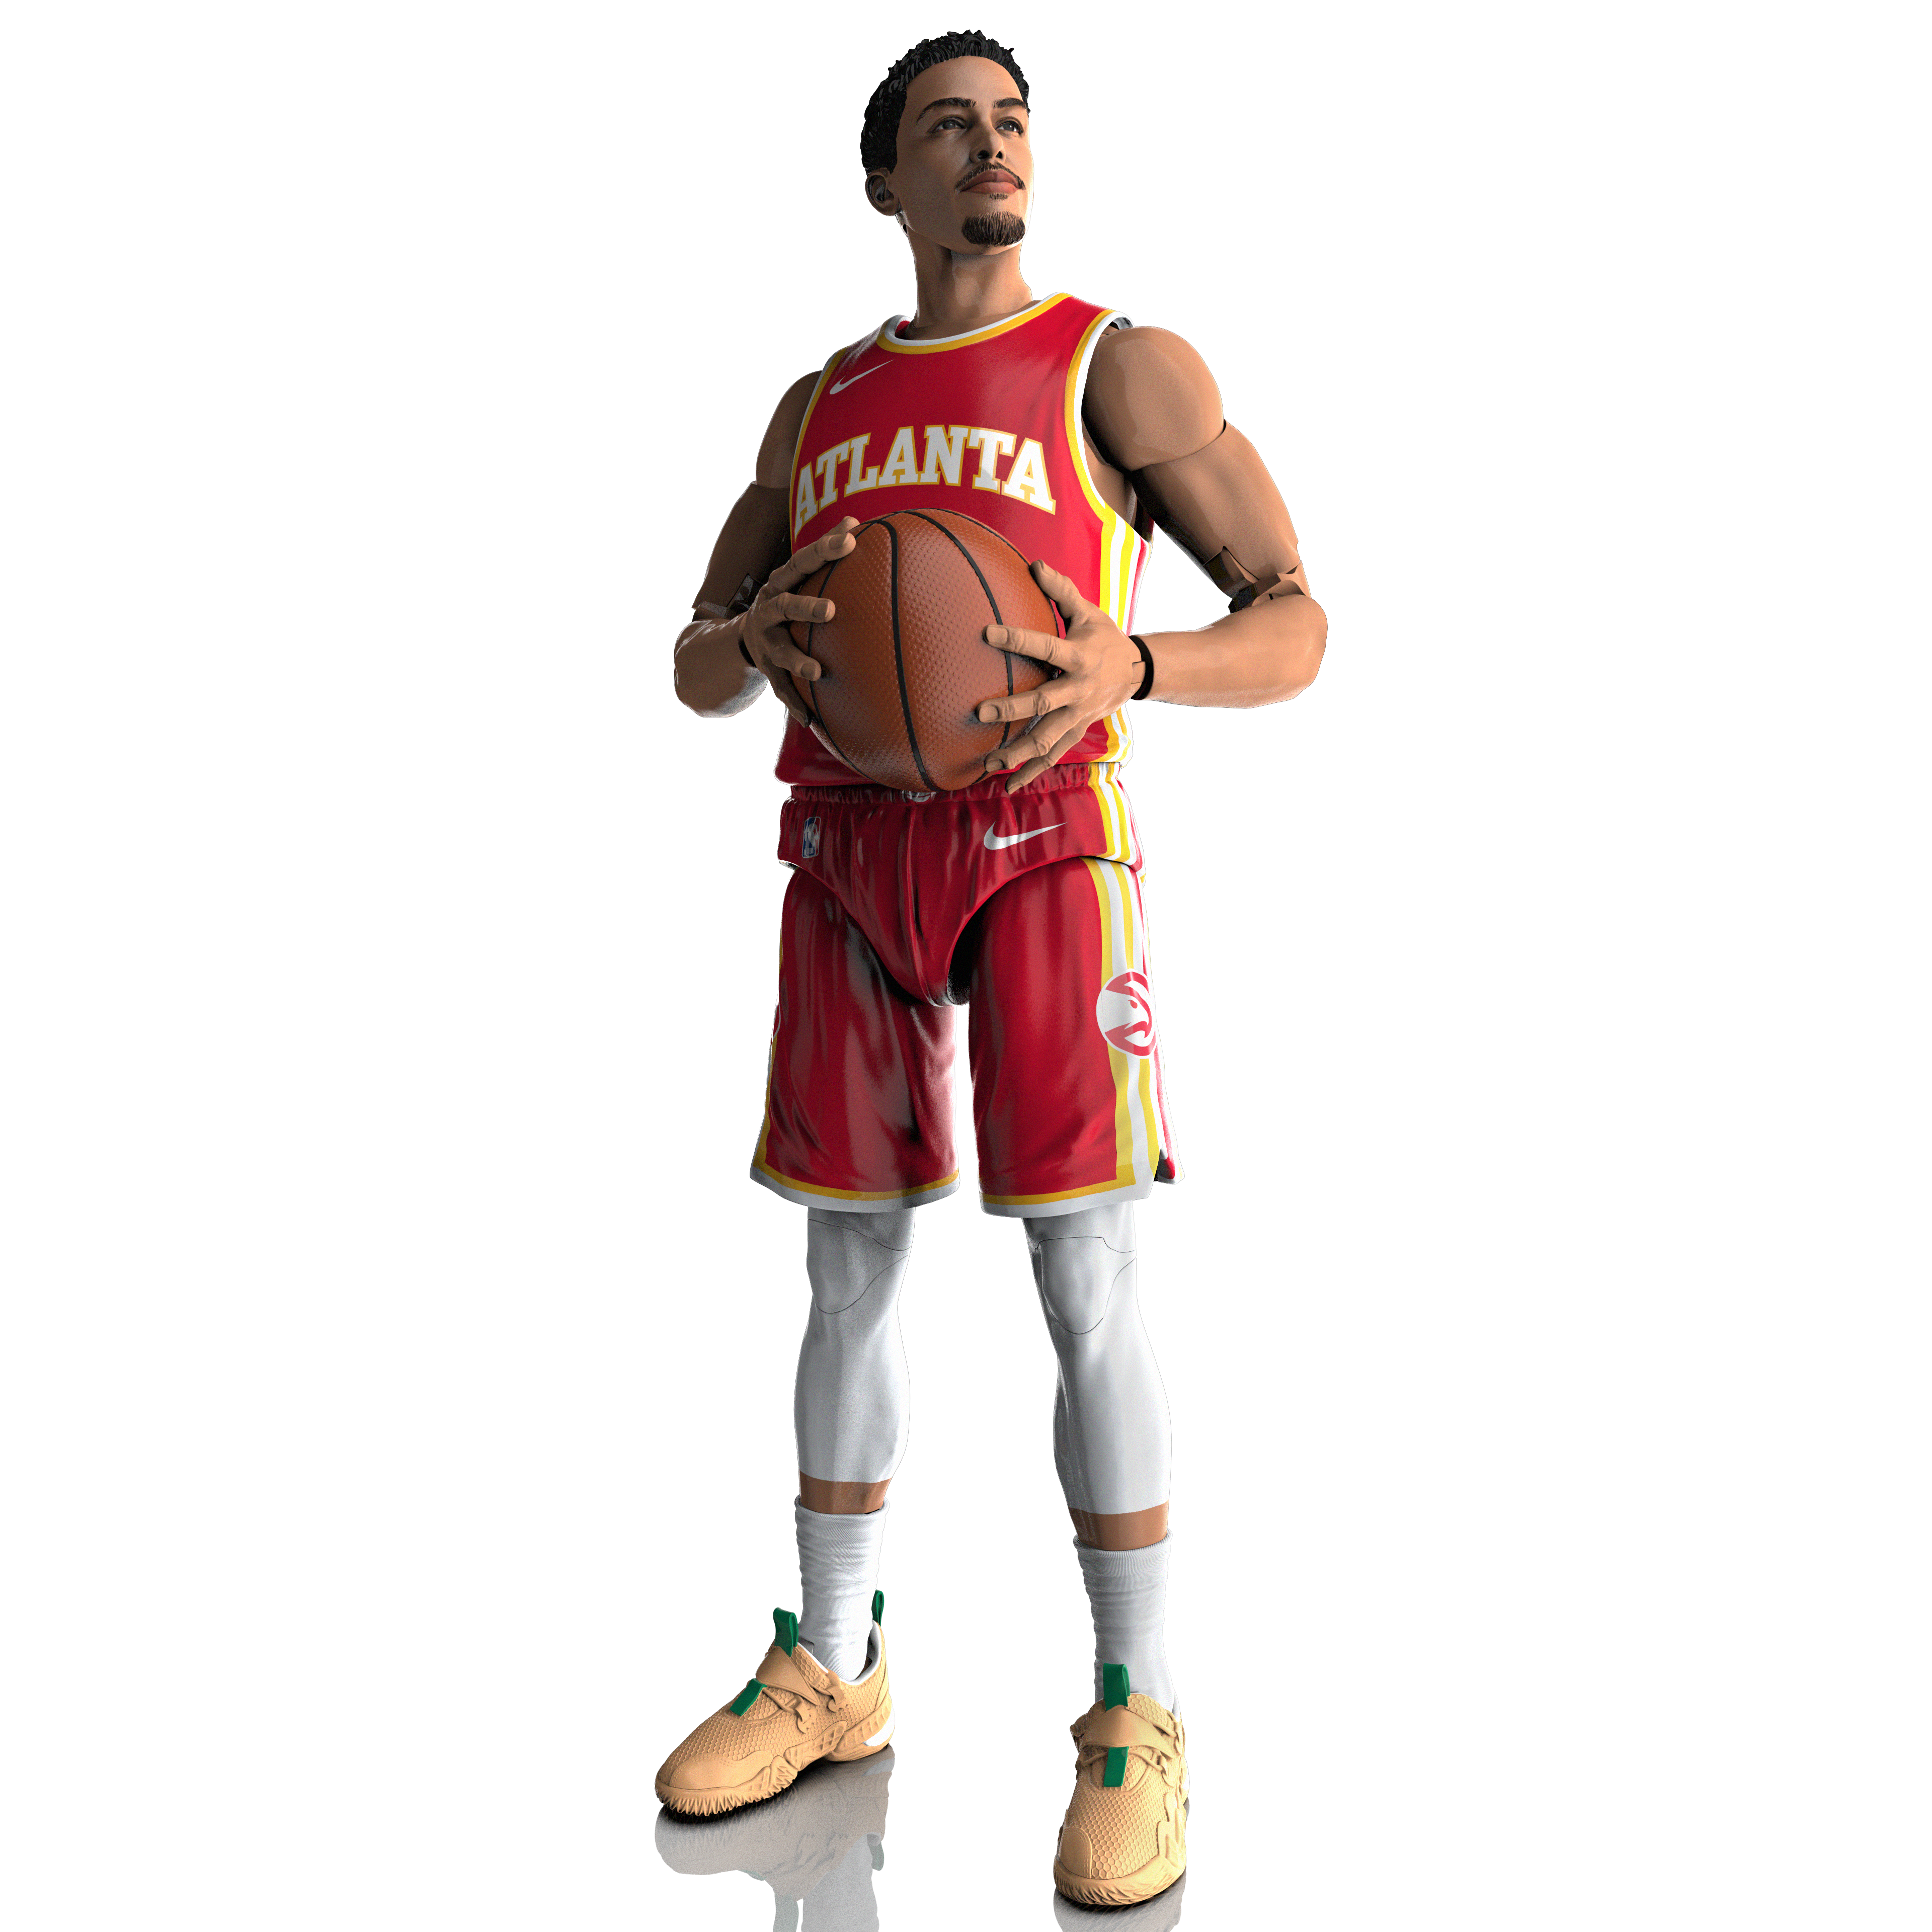 Starting Lineup’s New Trae Young Action Figure Captures the Rarity of the NBA Superstar